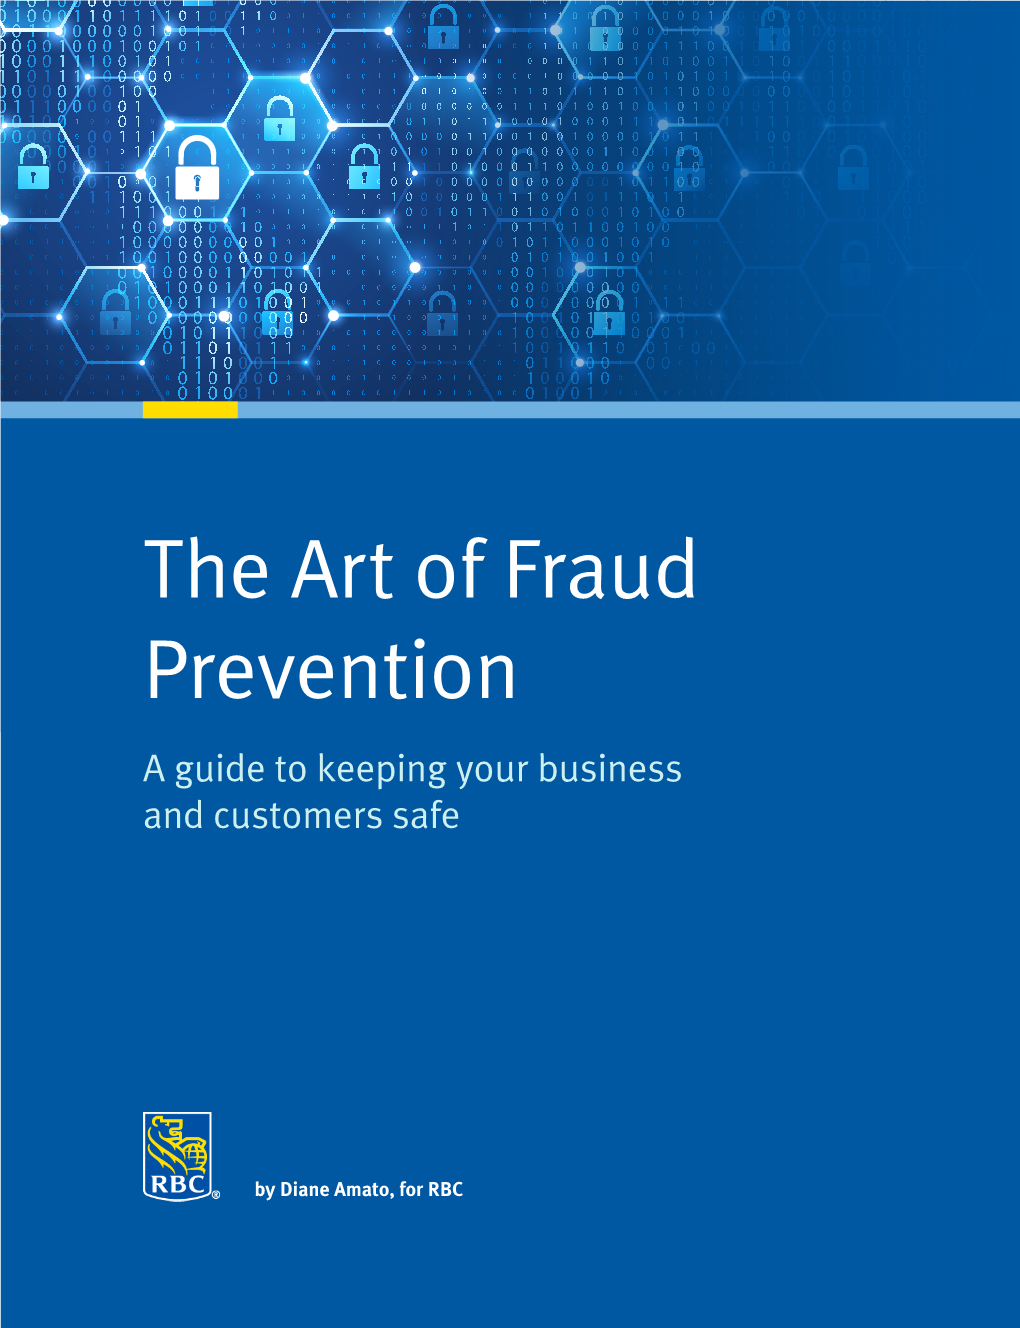 The Art of Fraud Prevention a Guide to Keeping Your Business and Customers Safe